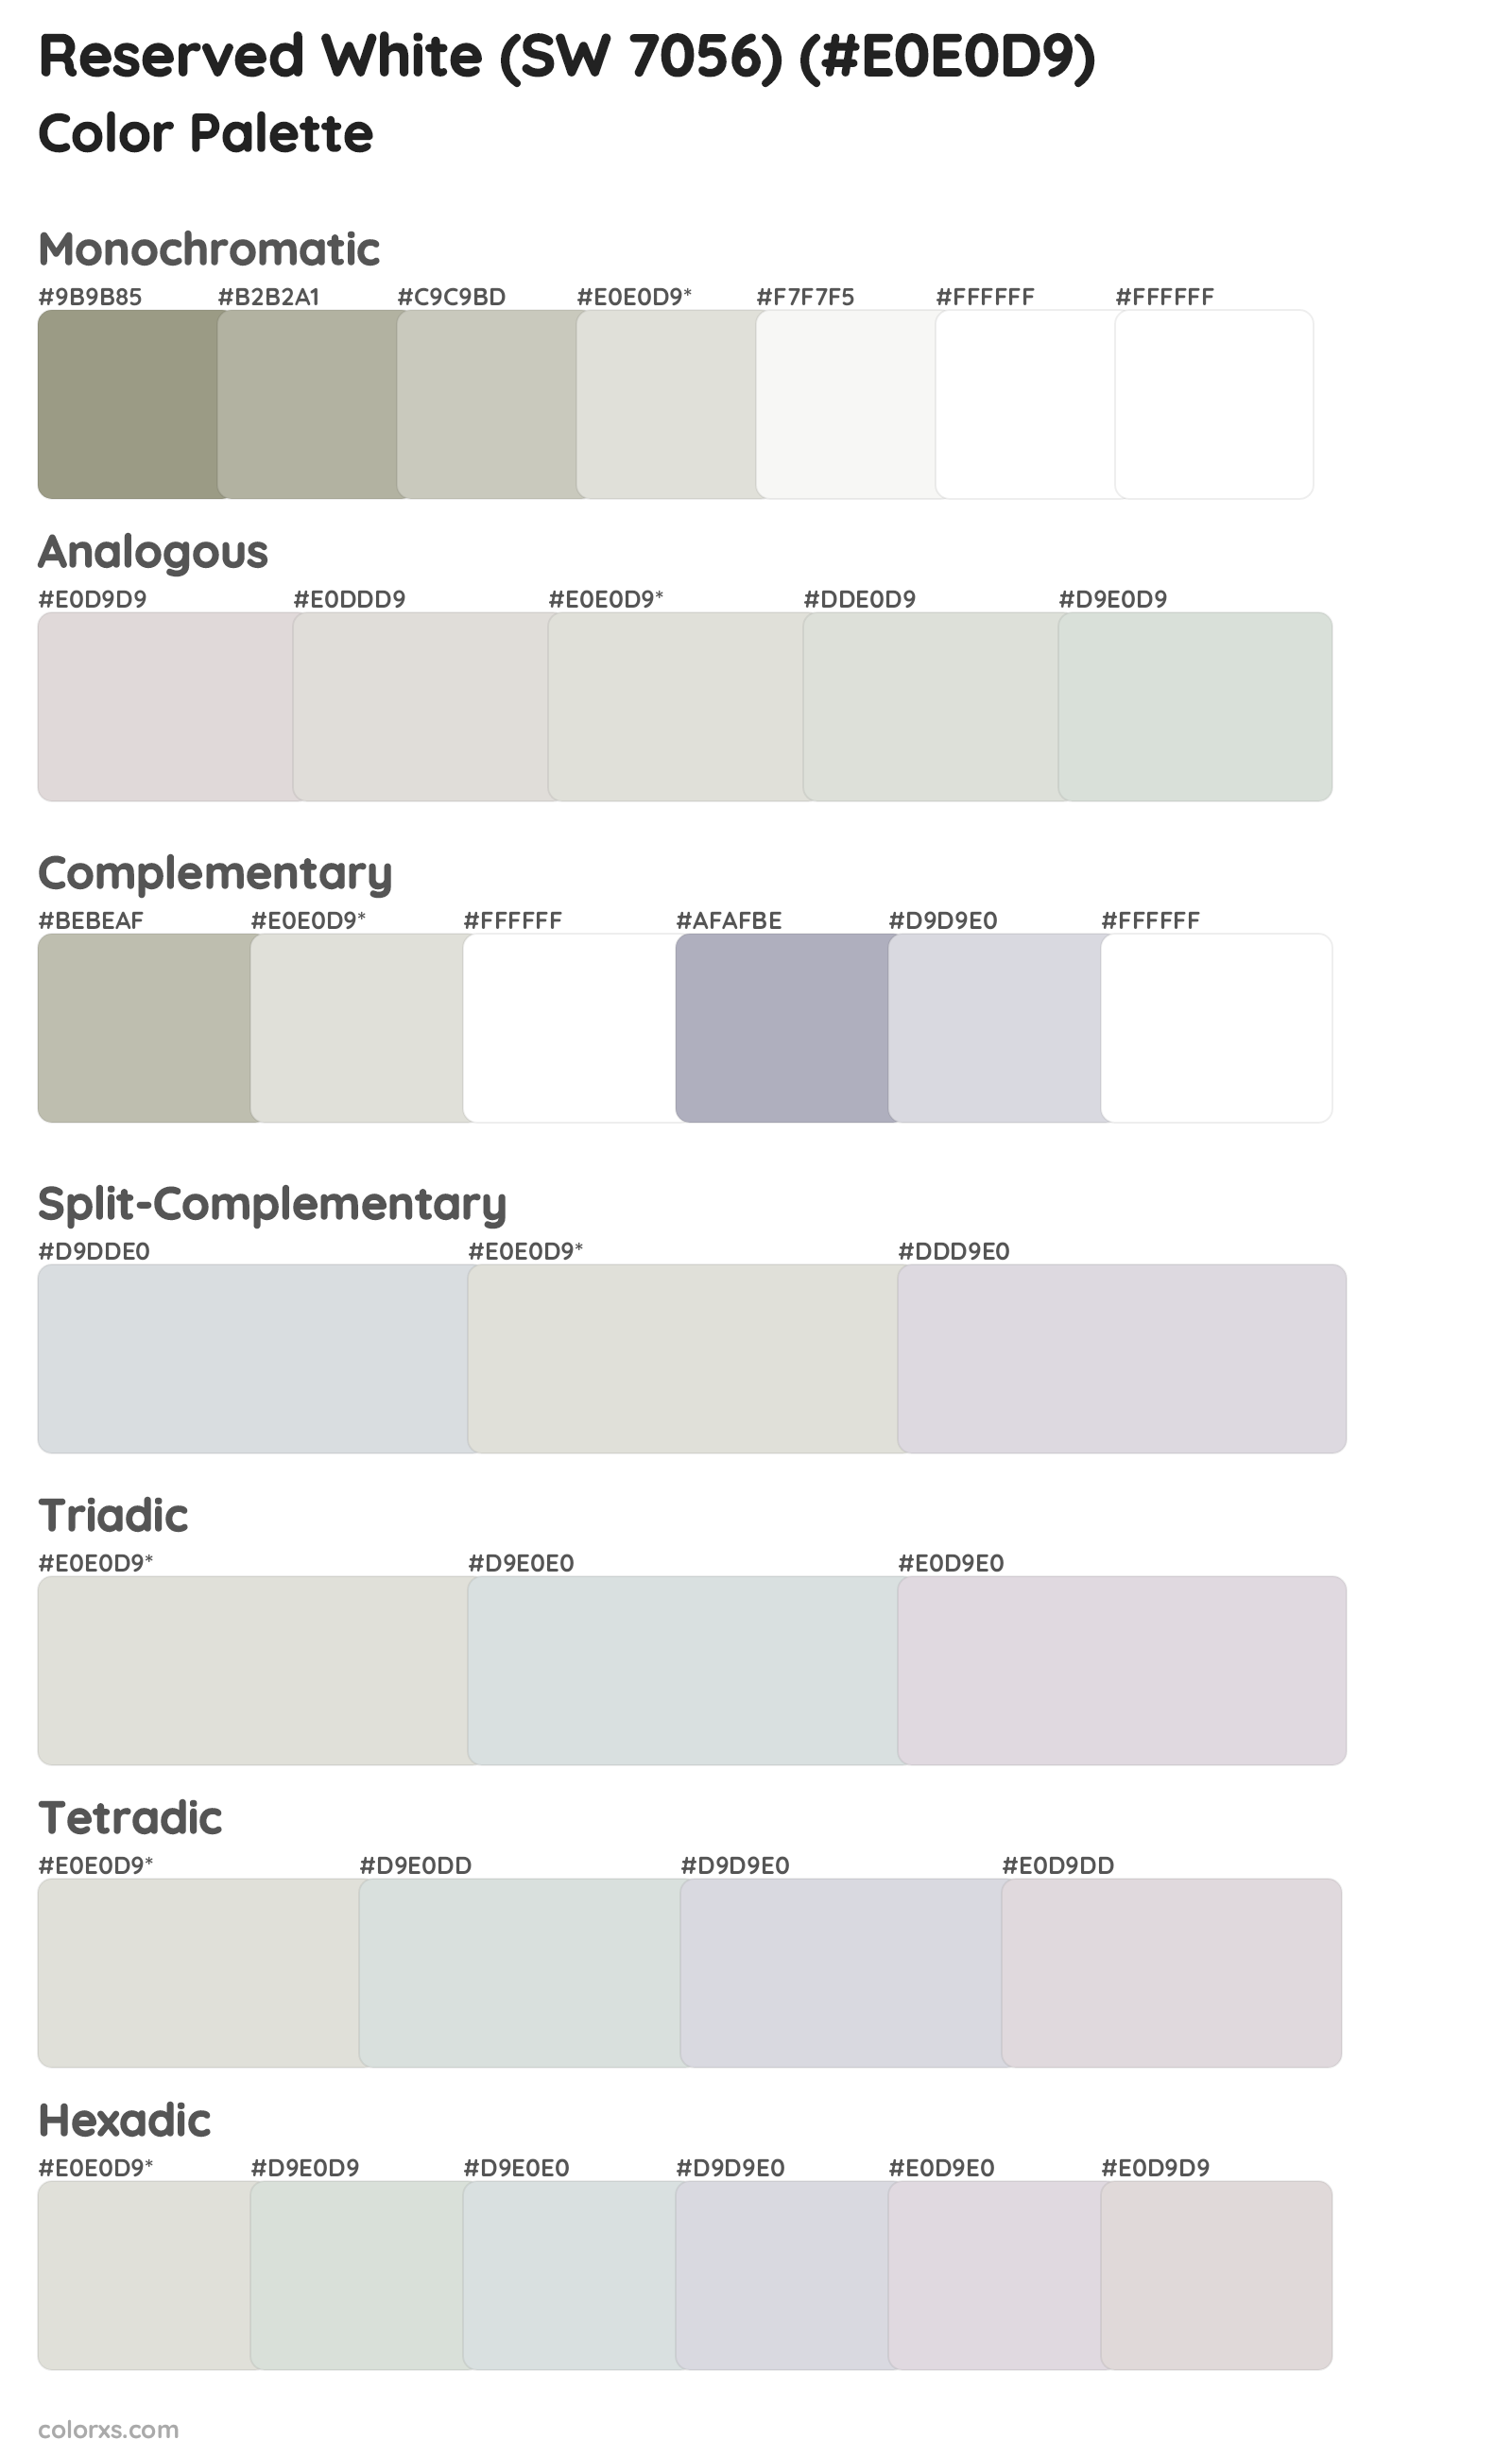 Reserved White (SW 7056) Color Scheme Palettes